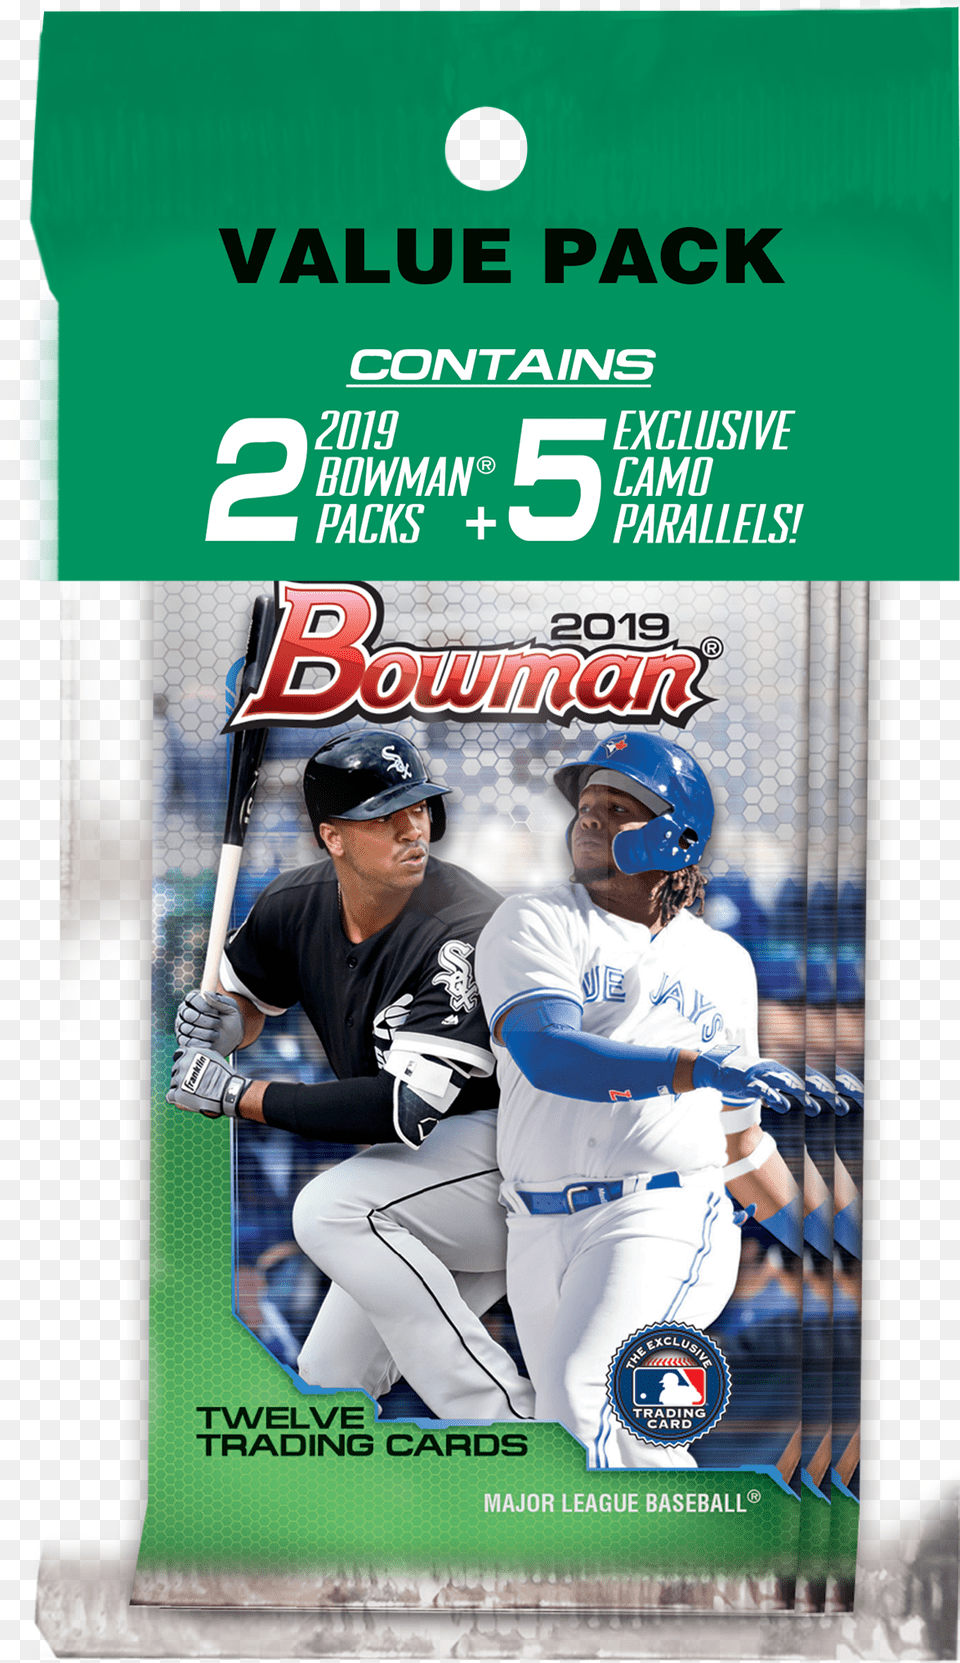 2019 Topps Bowman Baseball Value Pack 5 Exclusive Parallel 2019 Bowman Hobby Box, Helmet, Person, People, Man Png Image